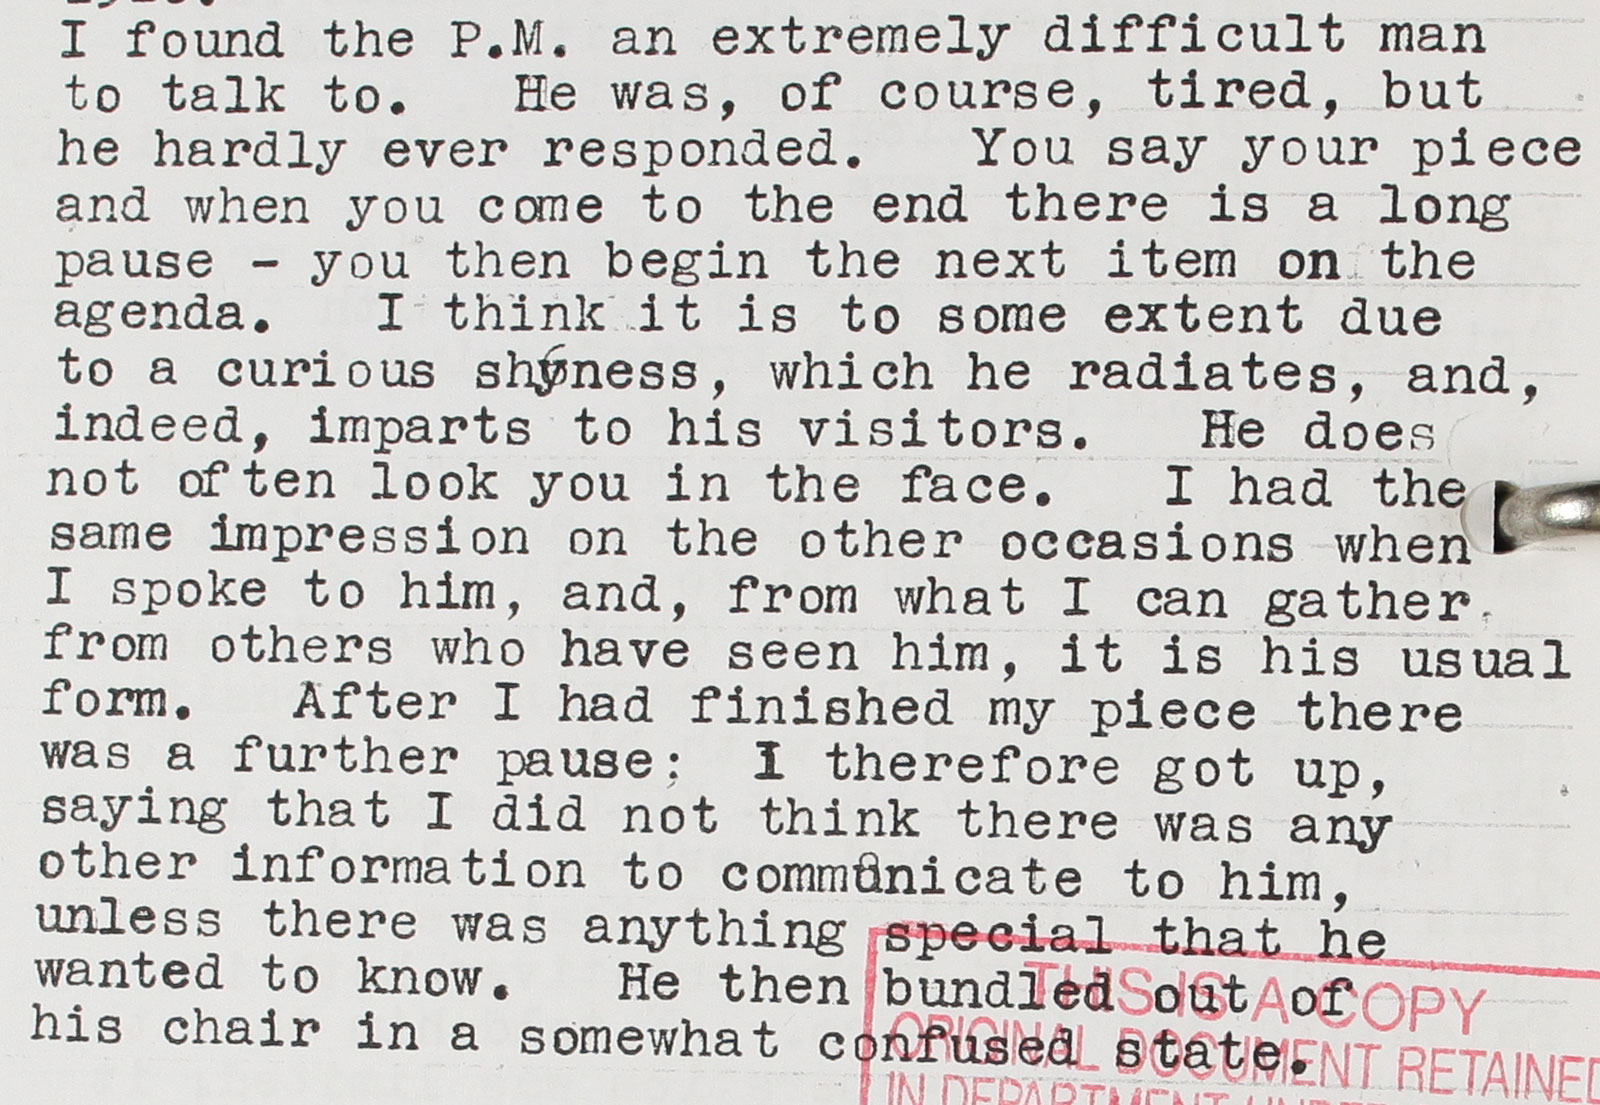 Extract from the diary of Guy Liddell, Deputy Director General of the Security Service, September 1946 to March 1947 (KV 4/468)